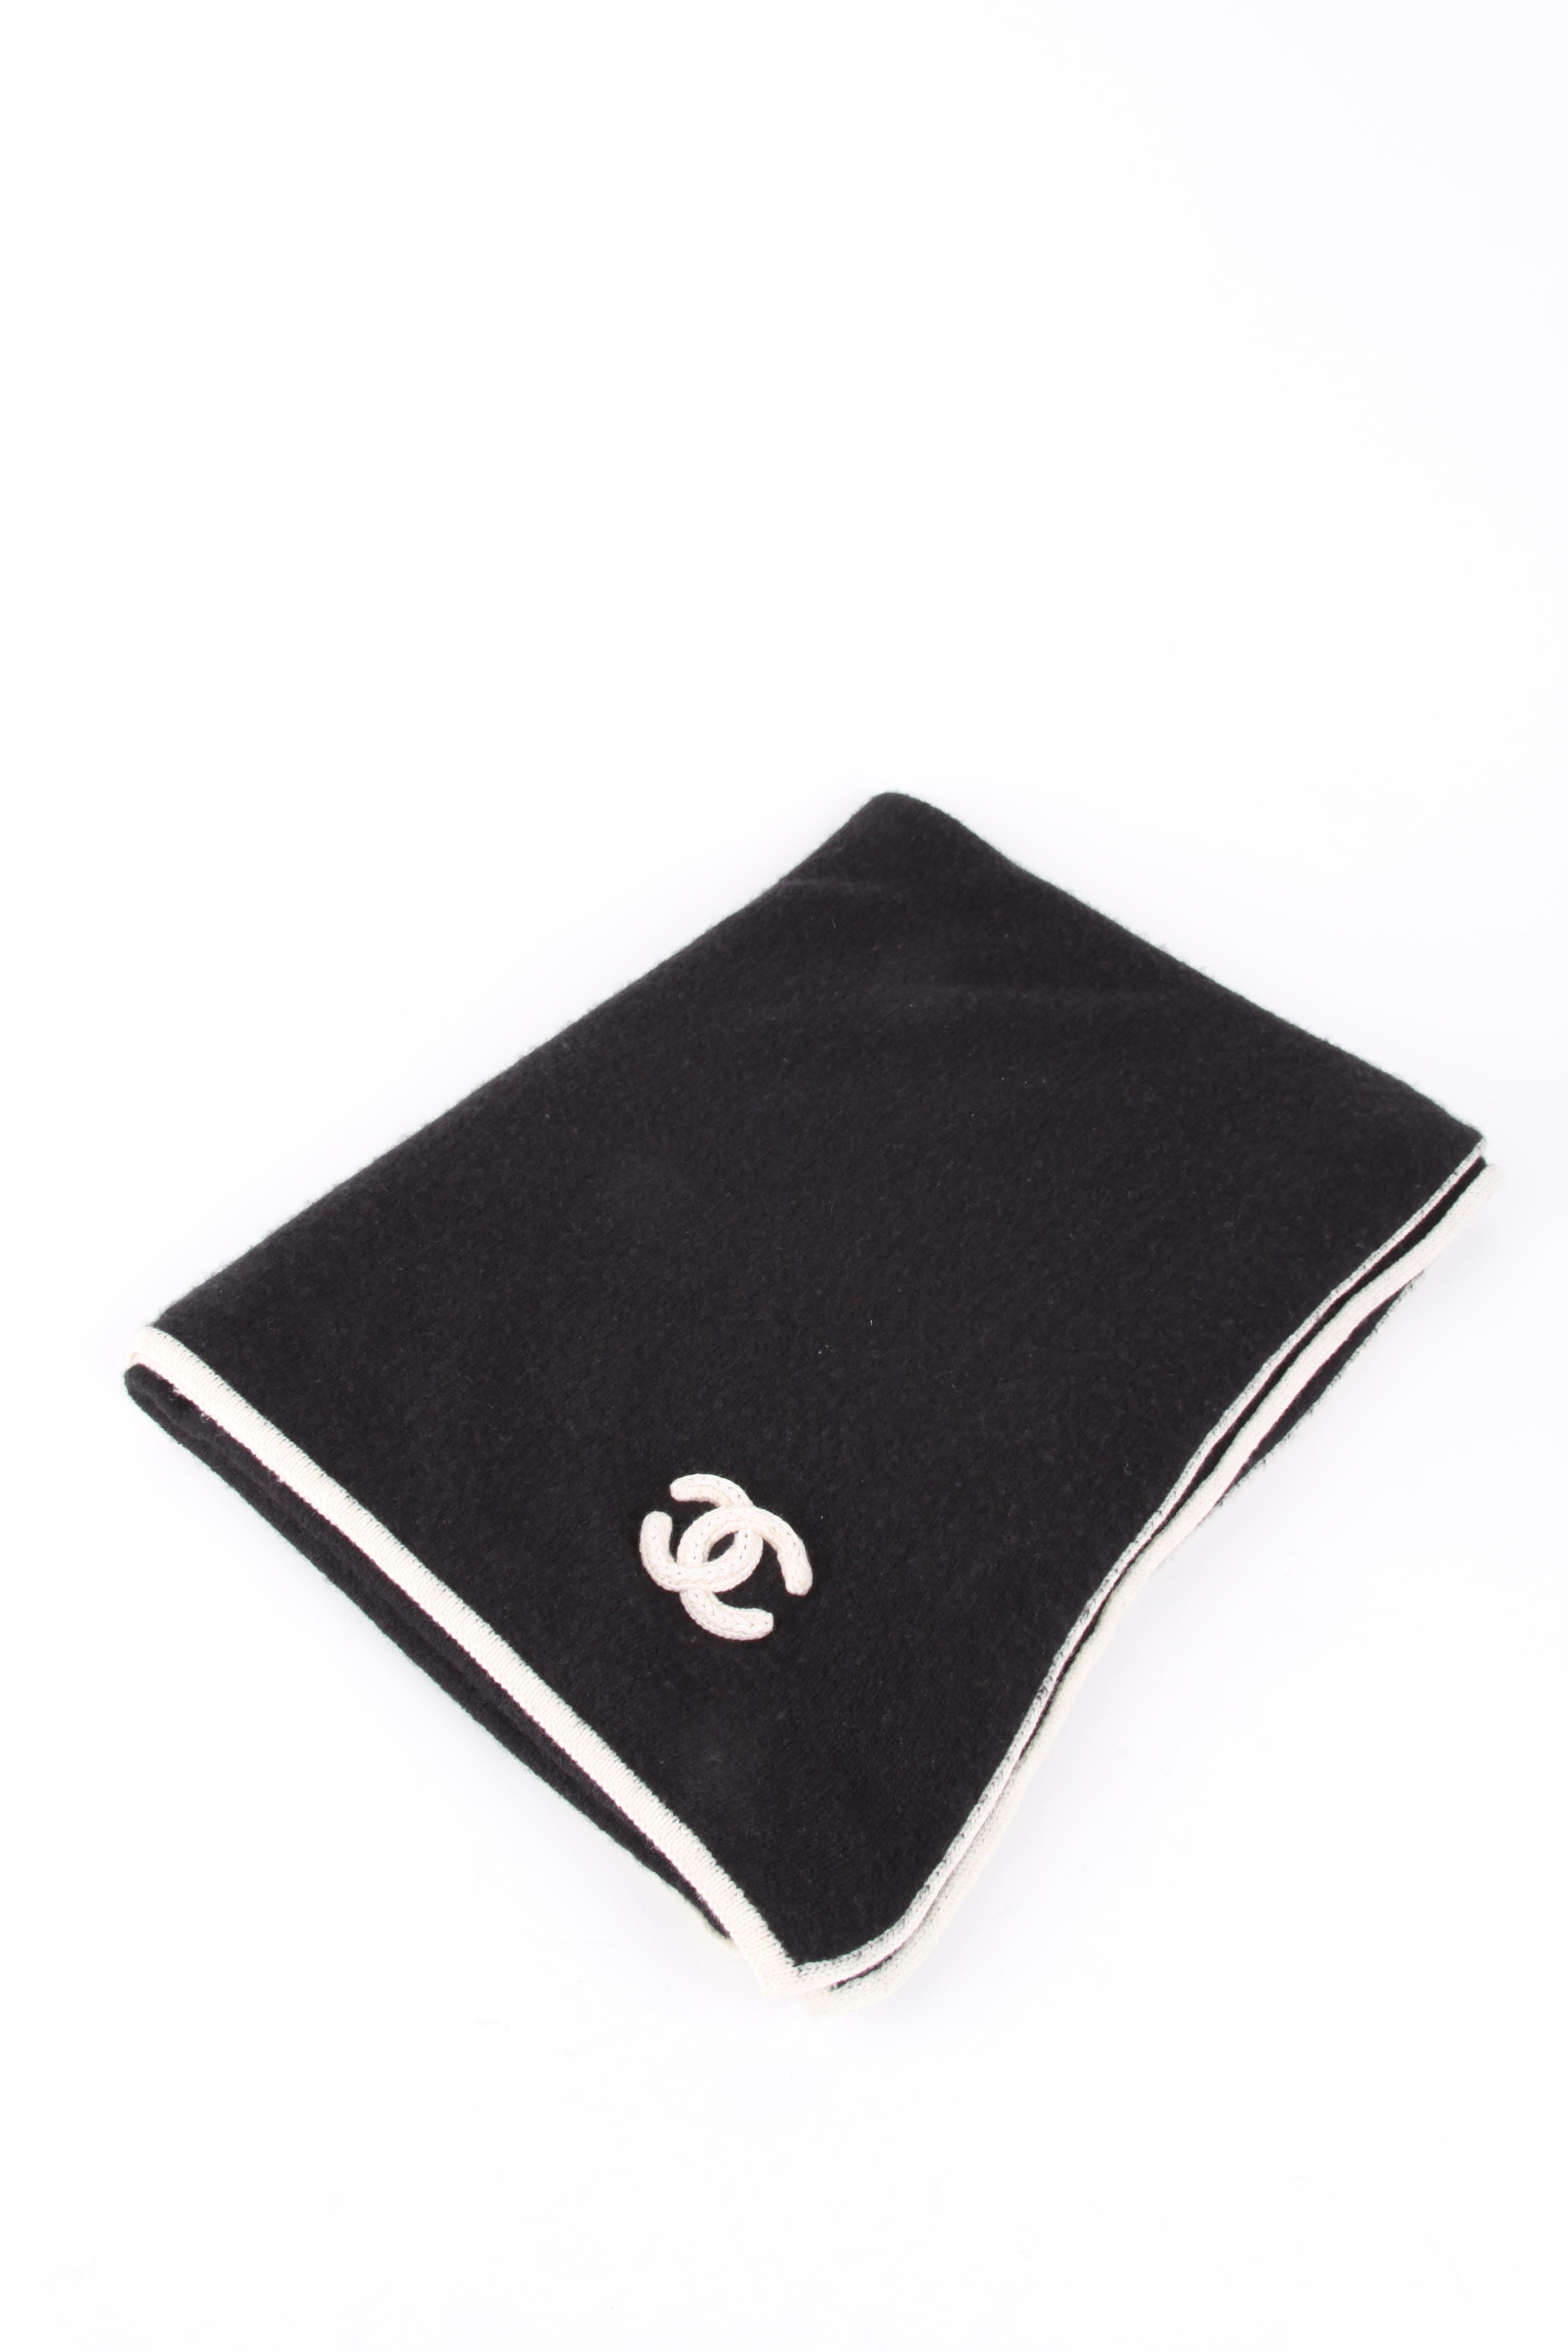 Chanel Black White CC Logo Cashmere Scarf XXL In Excellent Condition For Sale In Baarn, NL